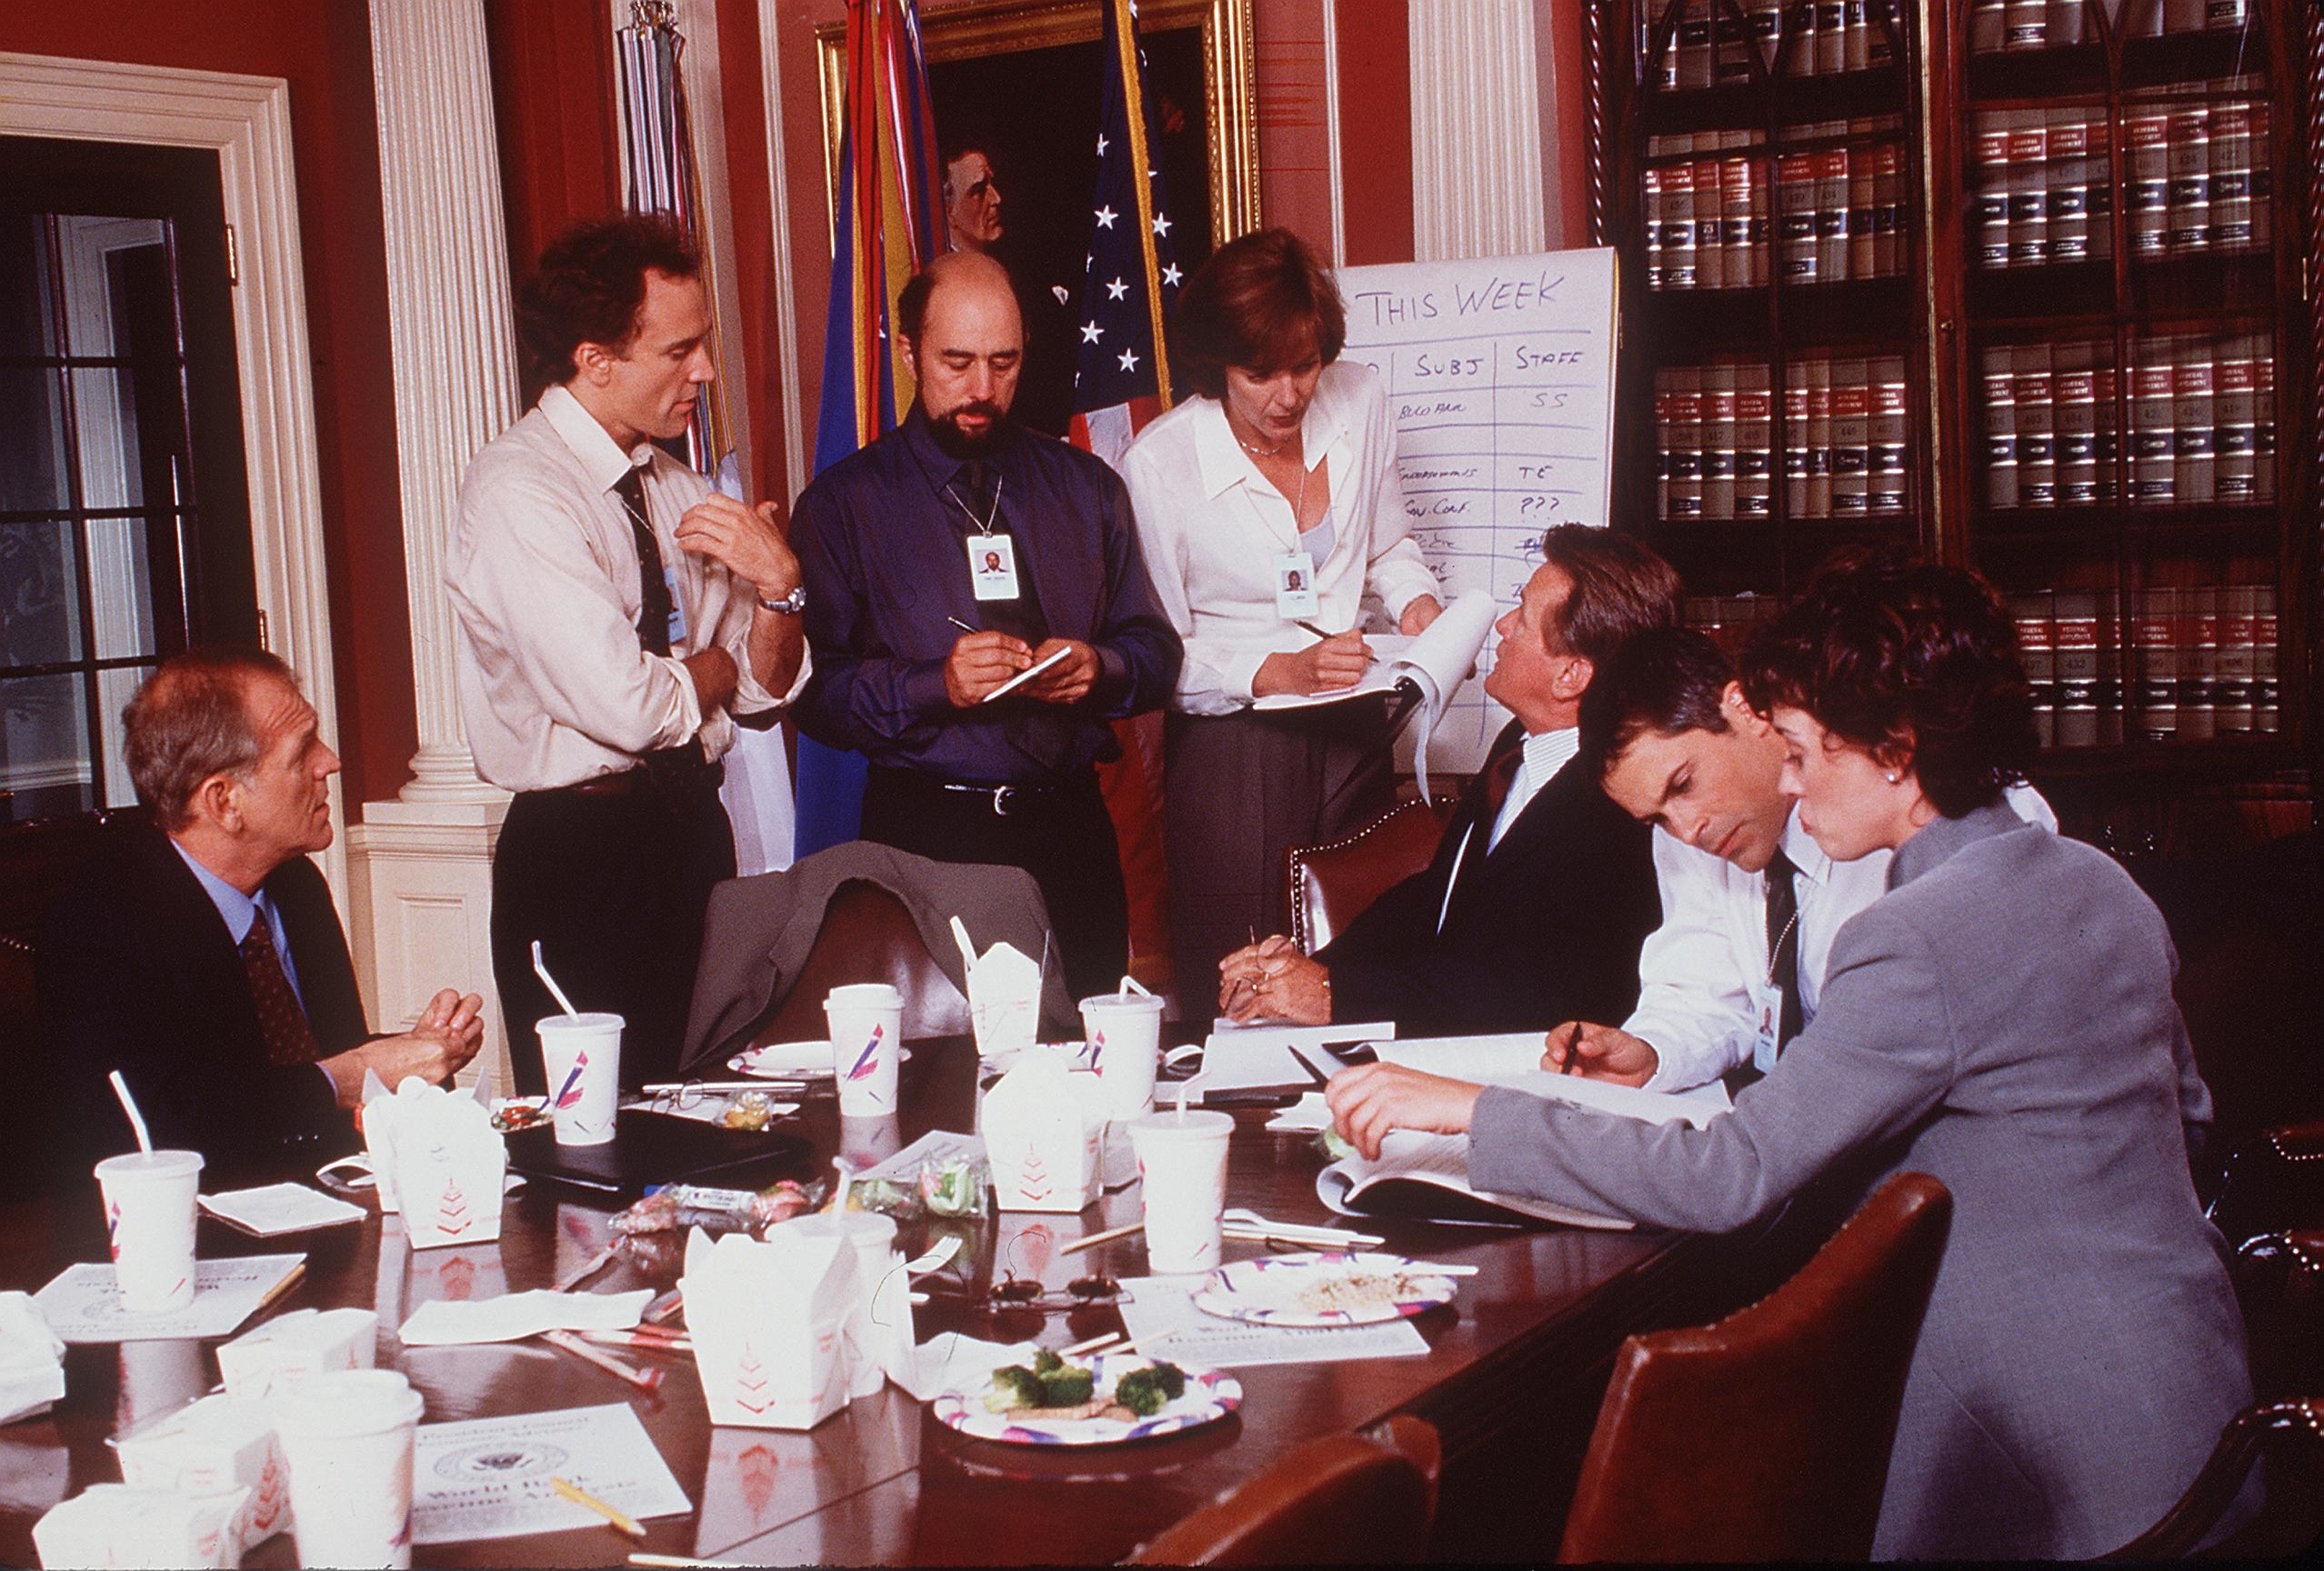 A promotional photo for The West Wing